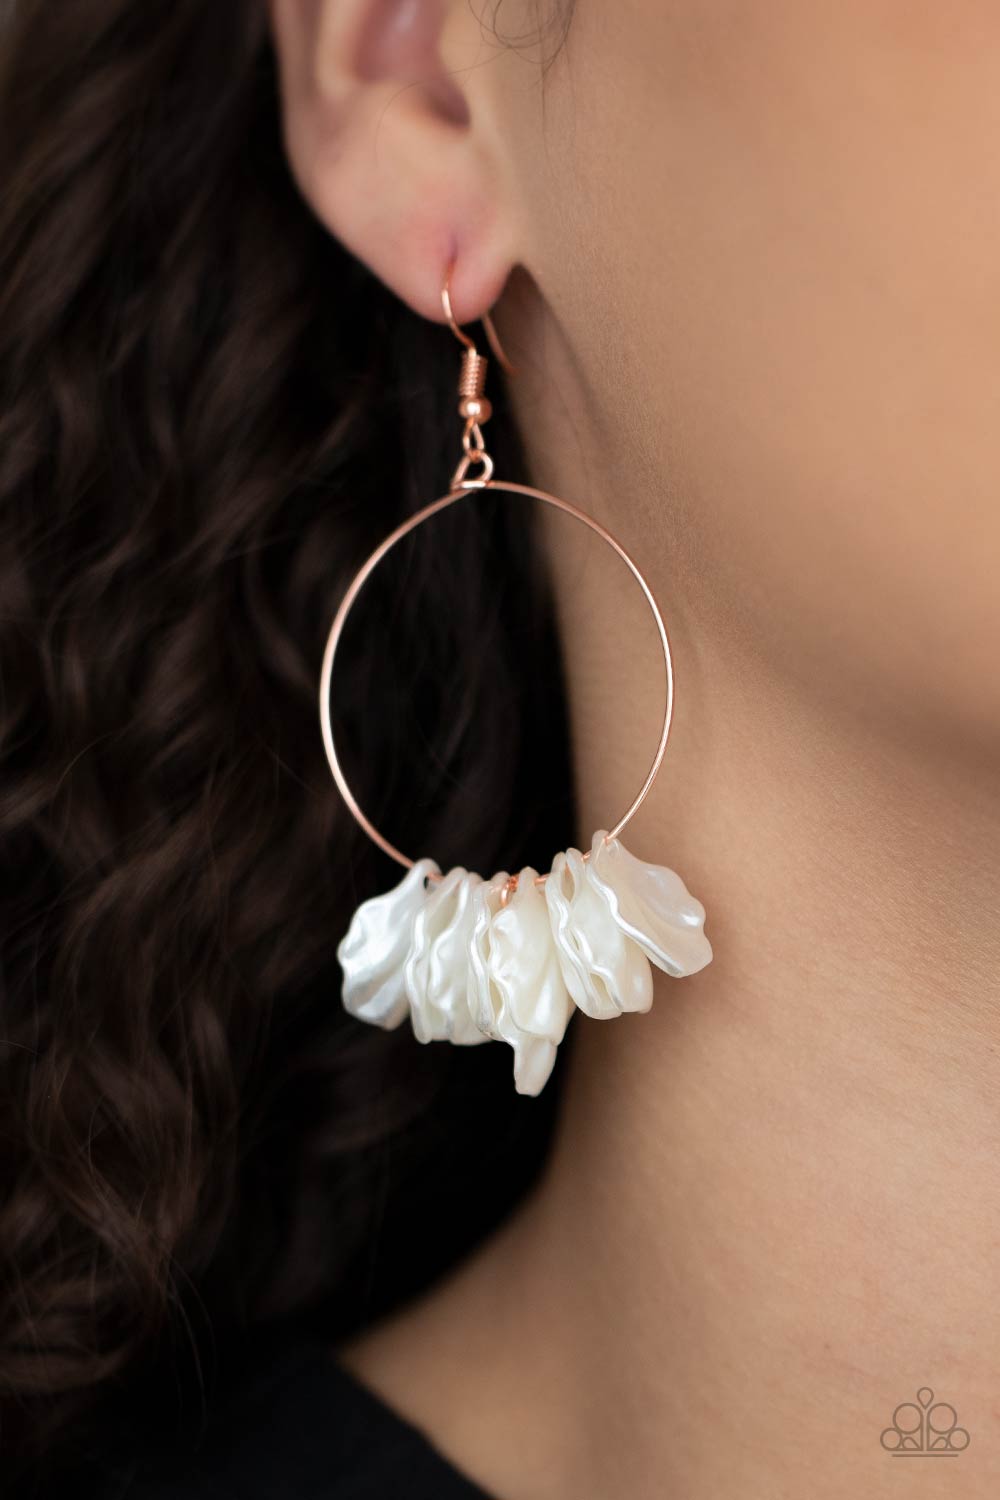 &lt;p&gt;Pearly shell-like beads are threaded along a dainty shiny copper wire, creating a flirtatious beach inspired fringe. Earring attaches to a standard fishhook fitting.&lt;/p&gt;
&lt;p&gt;&lt;i&gt; Sold as one pair of earrings. &lt;/i&gt;&lt;/p&gt;